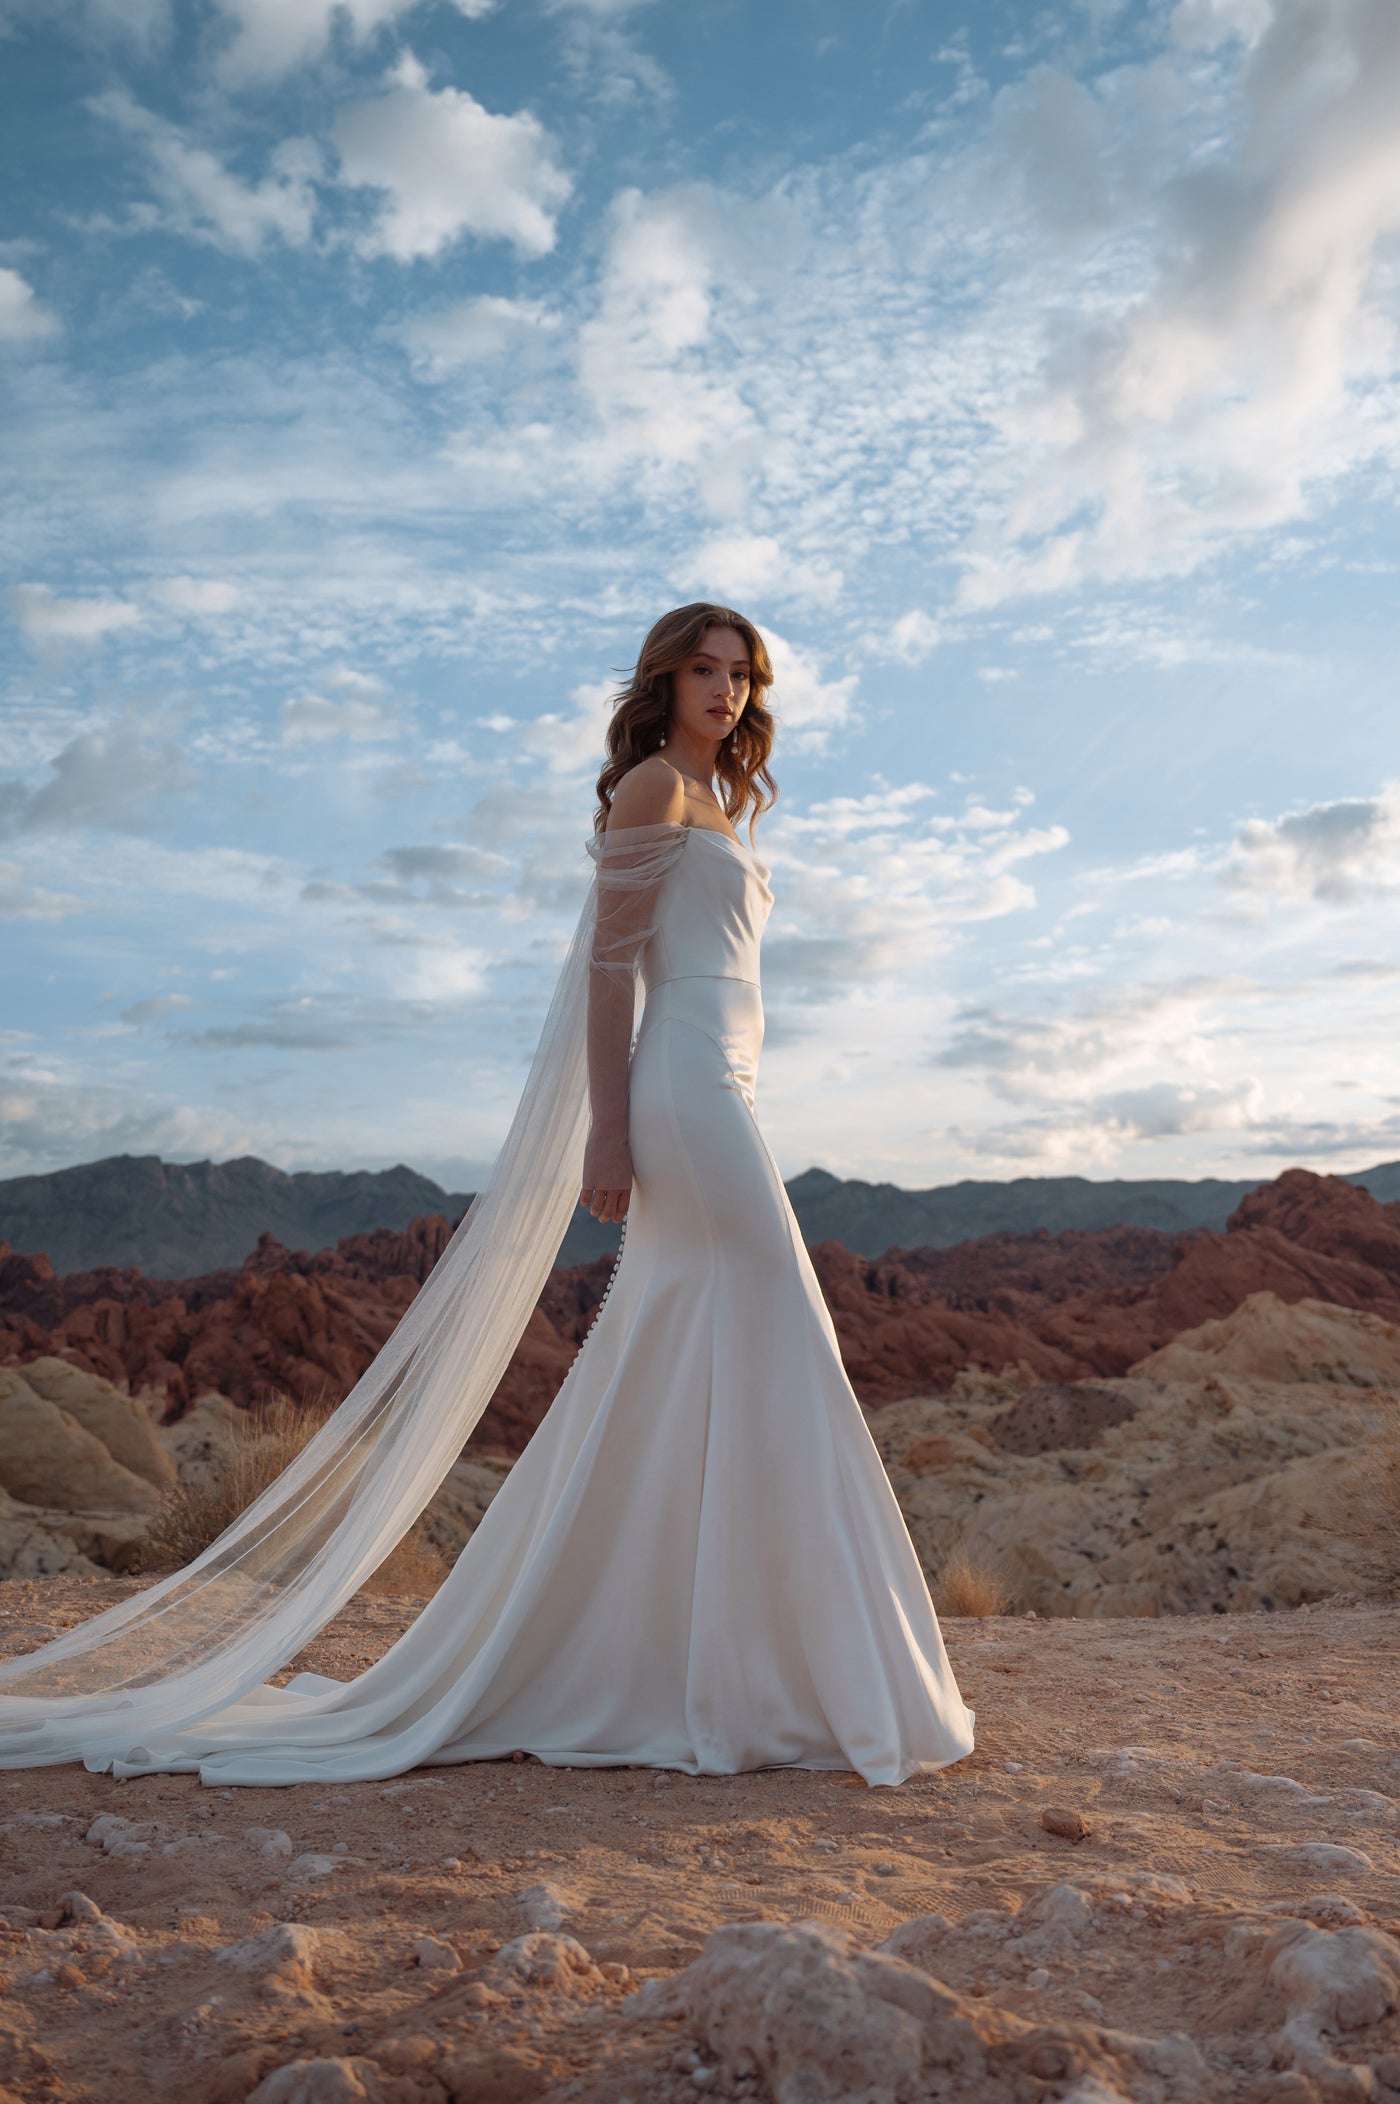 A woman in an elegant Jenny Yoo Wedding Dress gown featuring an off the shoulder sleeve and made of luxe satin fabric, with a long train, stands amidst rocky terrain under a cloudy sky.